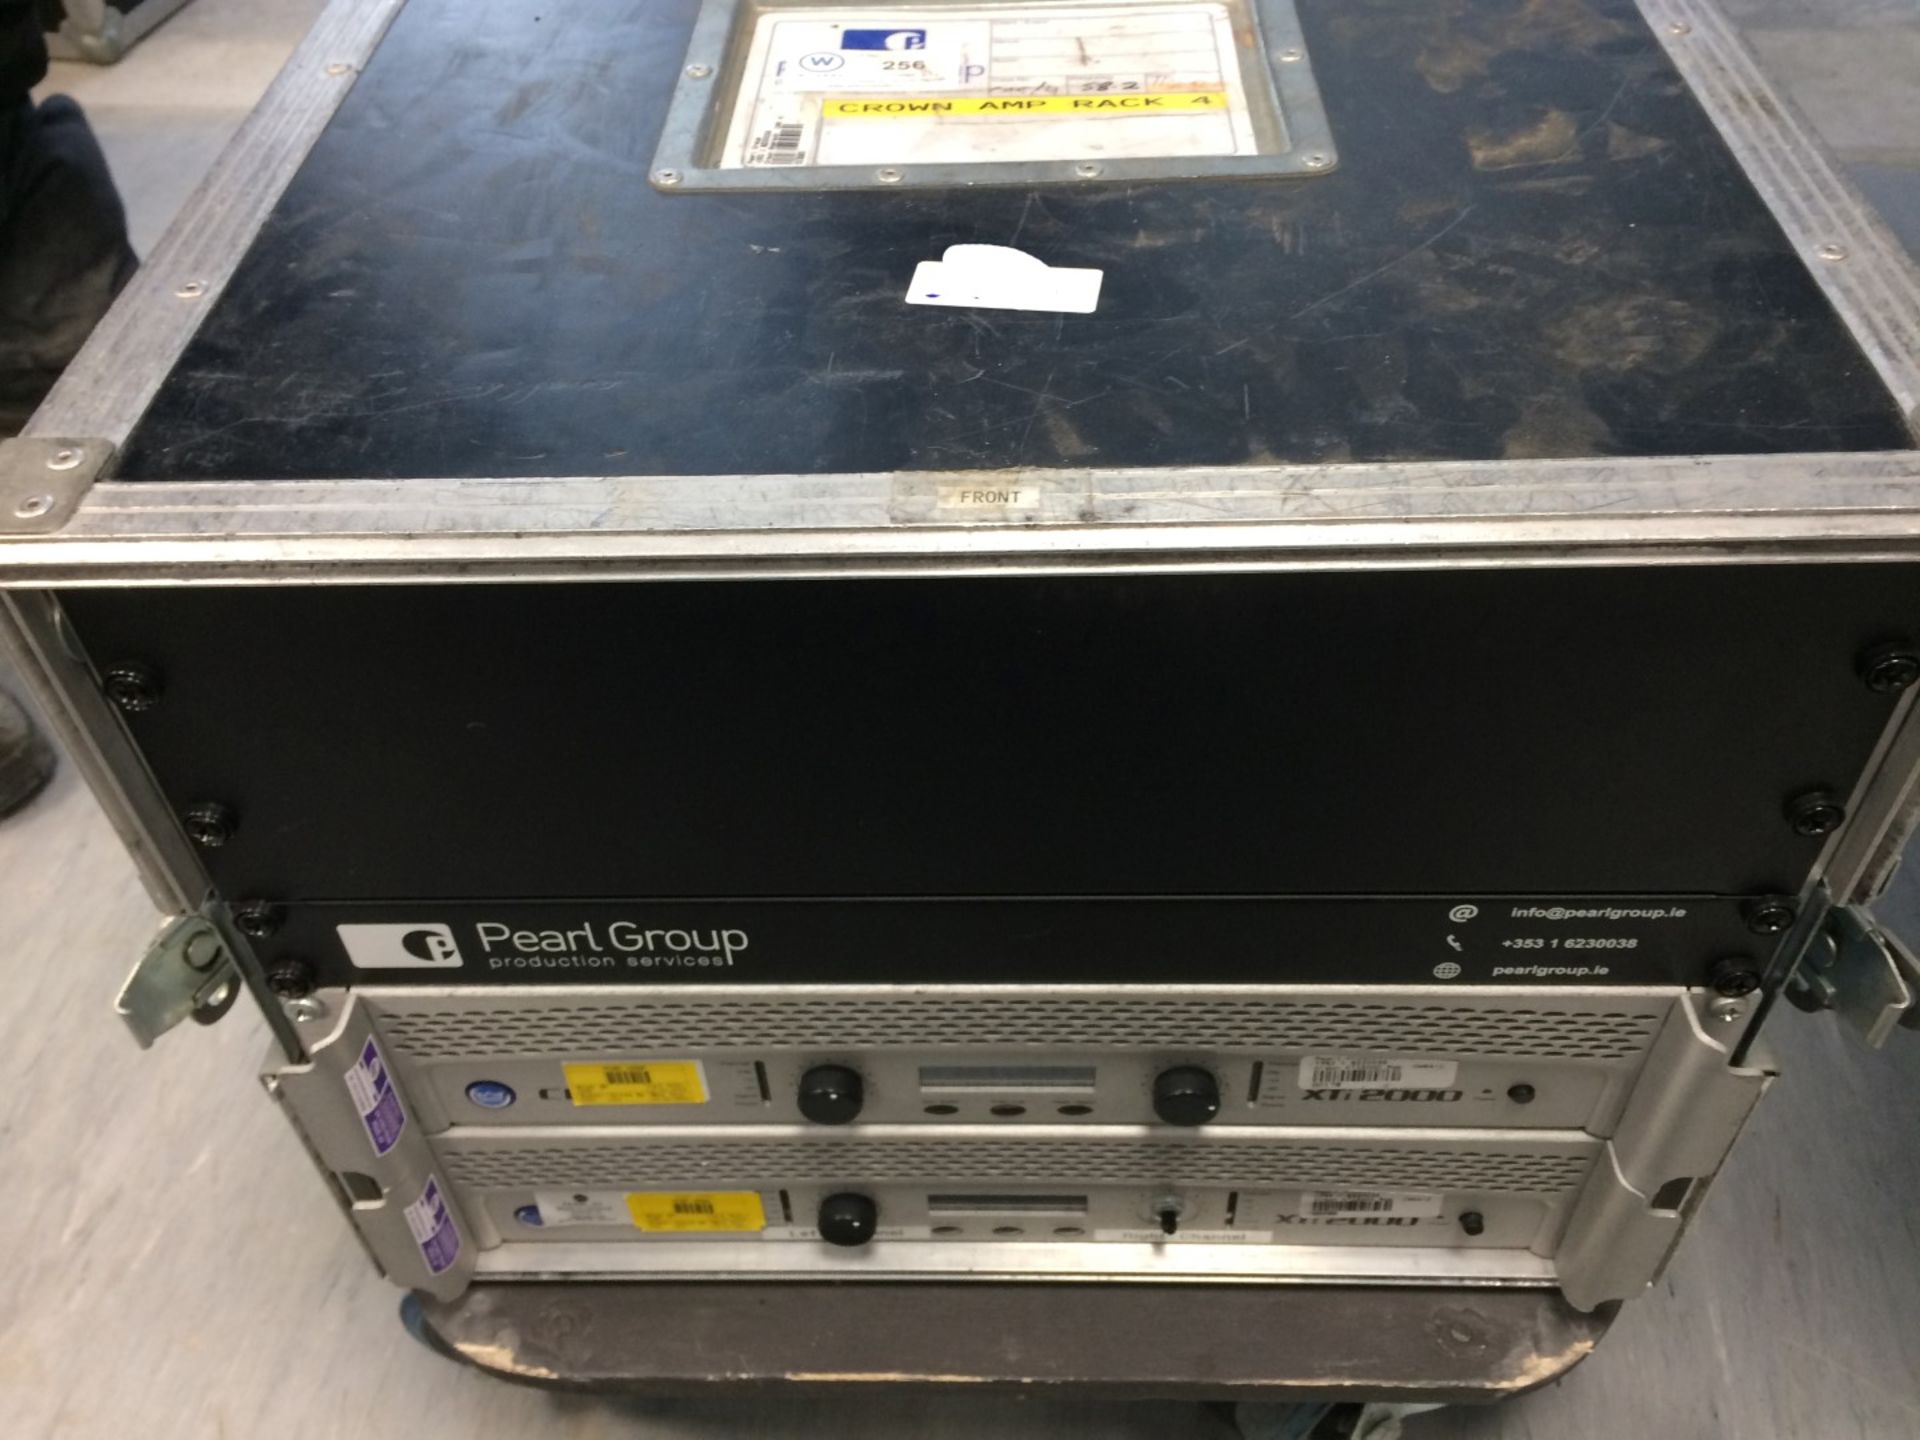 2 x CROWN XT2000 Units In Rack - Ref: 741 - CL581 - Location: Altrincham WA14 - Image 3 of 3